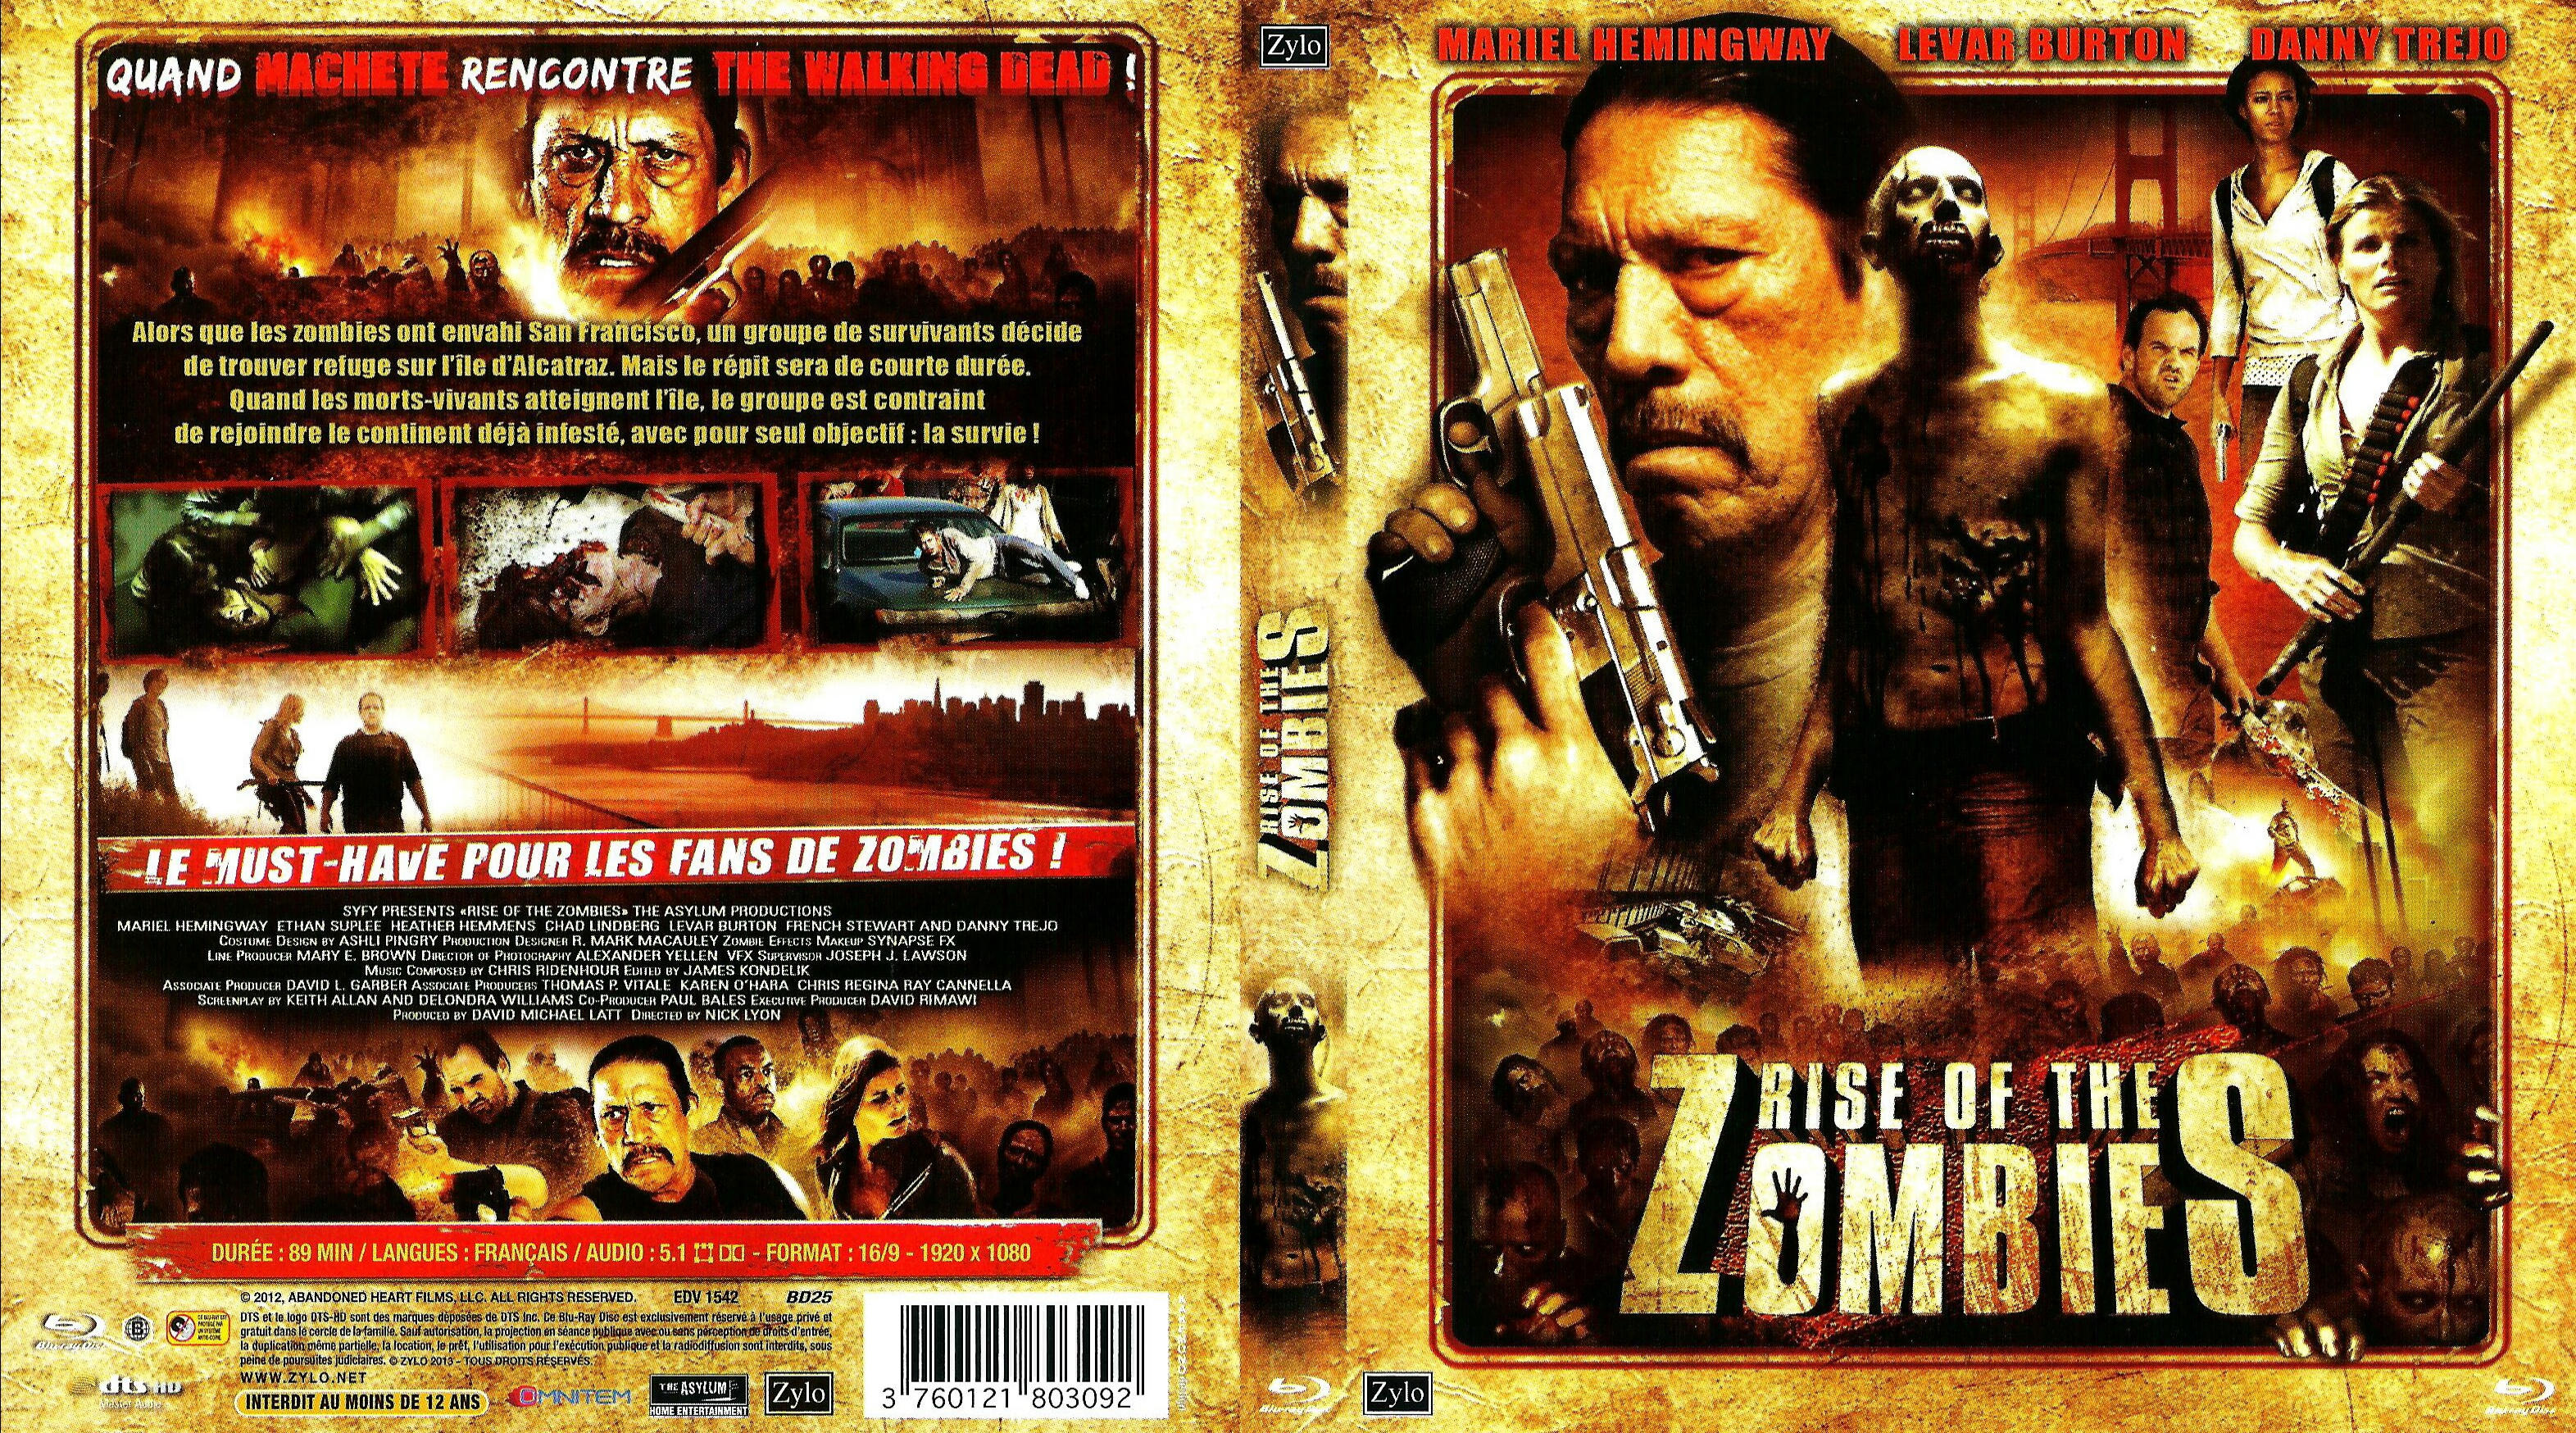 Jaquette DVD Rise of the Zombies (BLU-RAY)